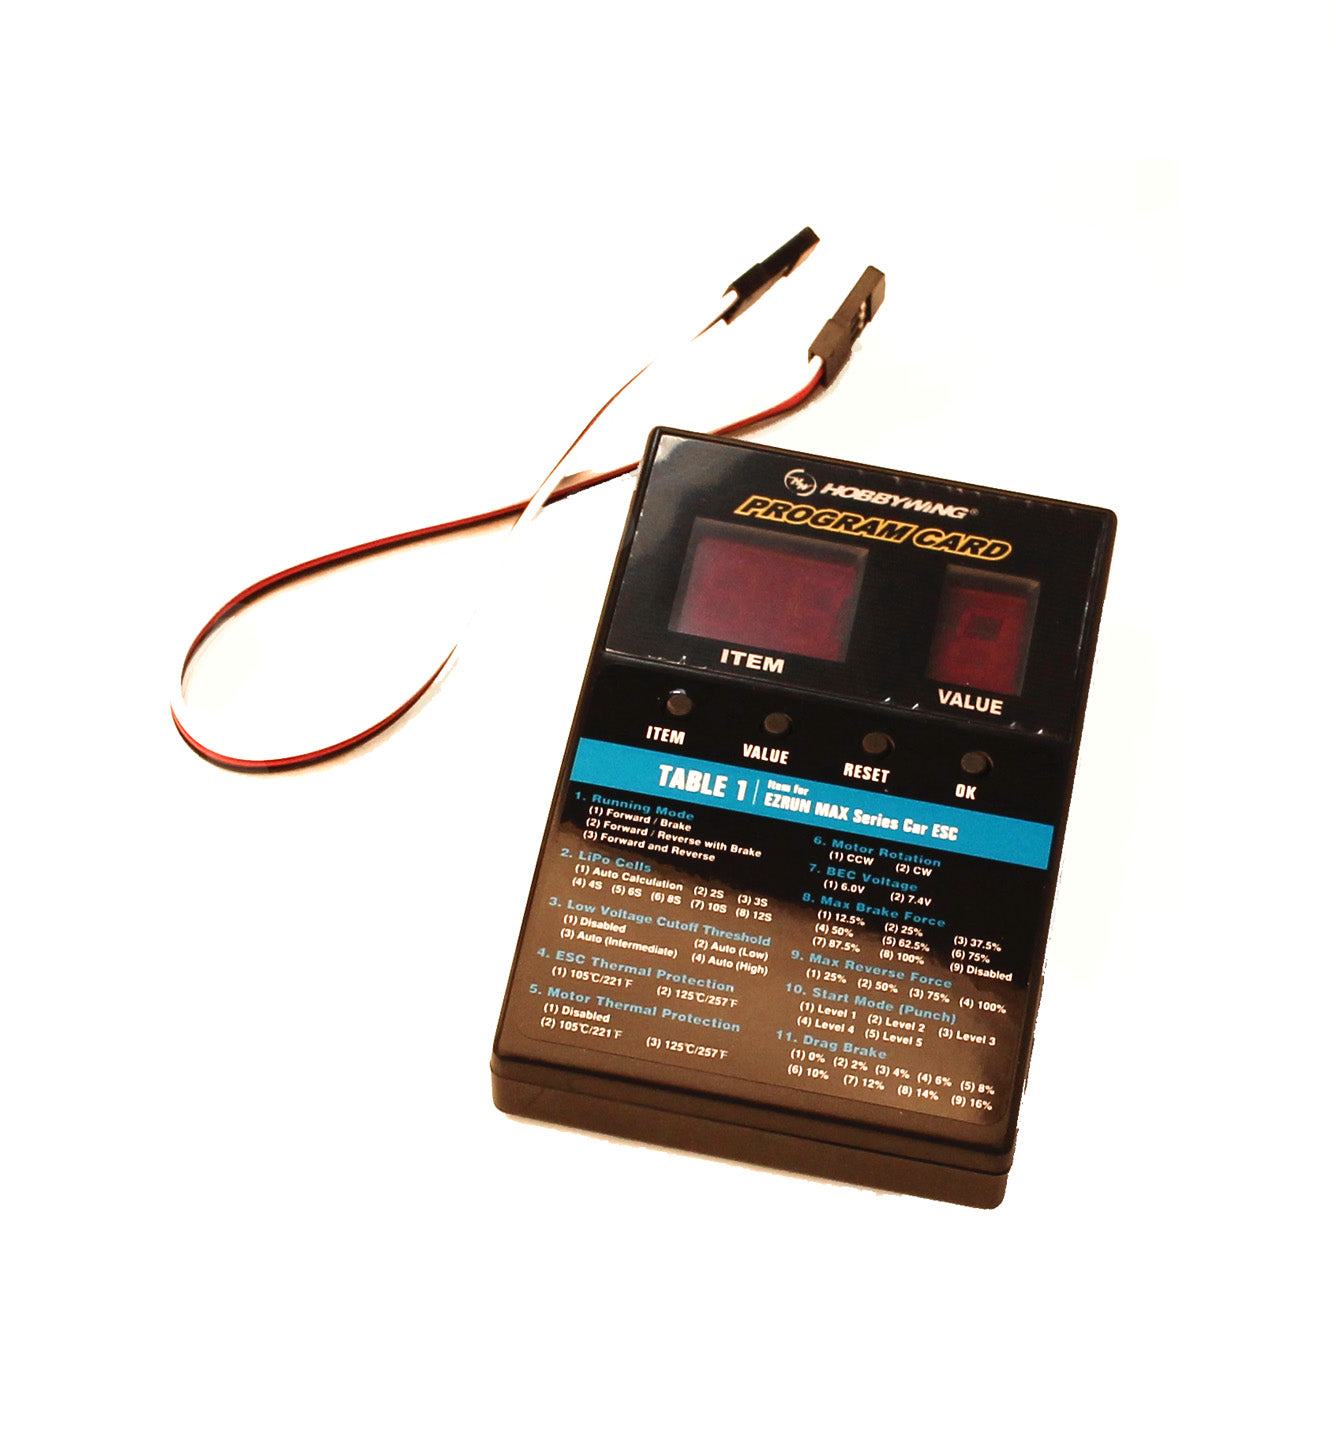 HOBBYWING 30501003 LED Program Card General Use for Cars Boats Air